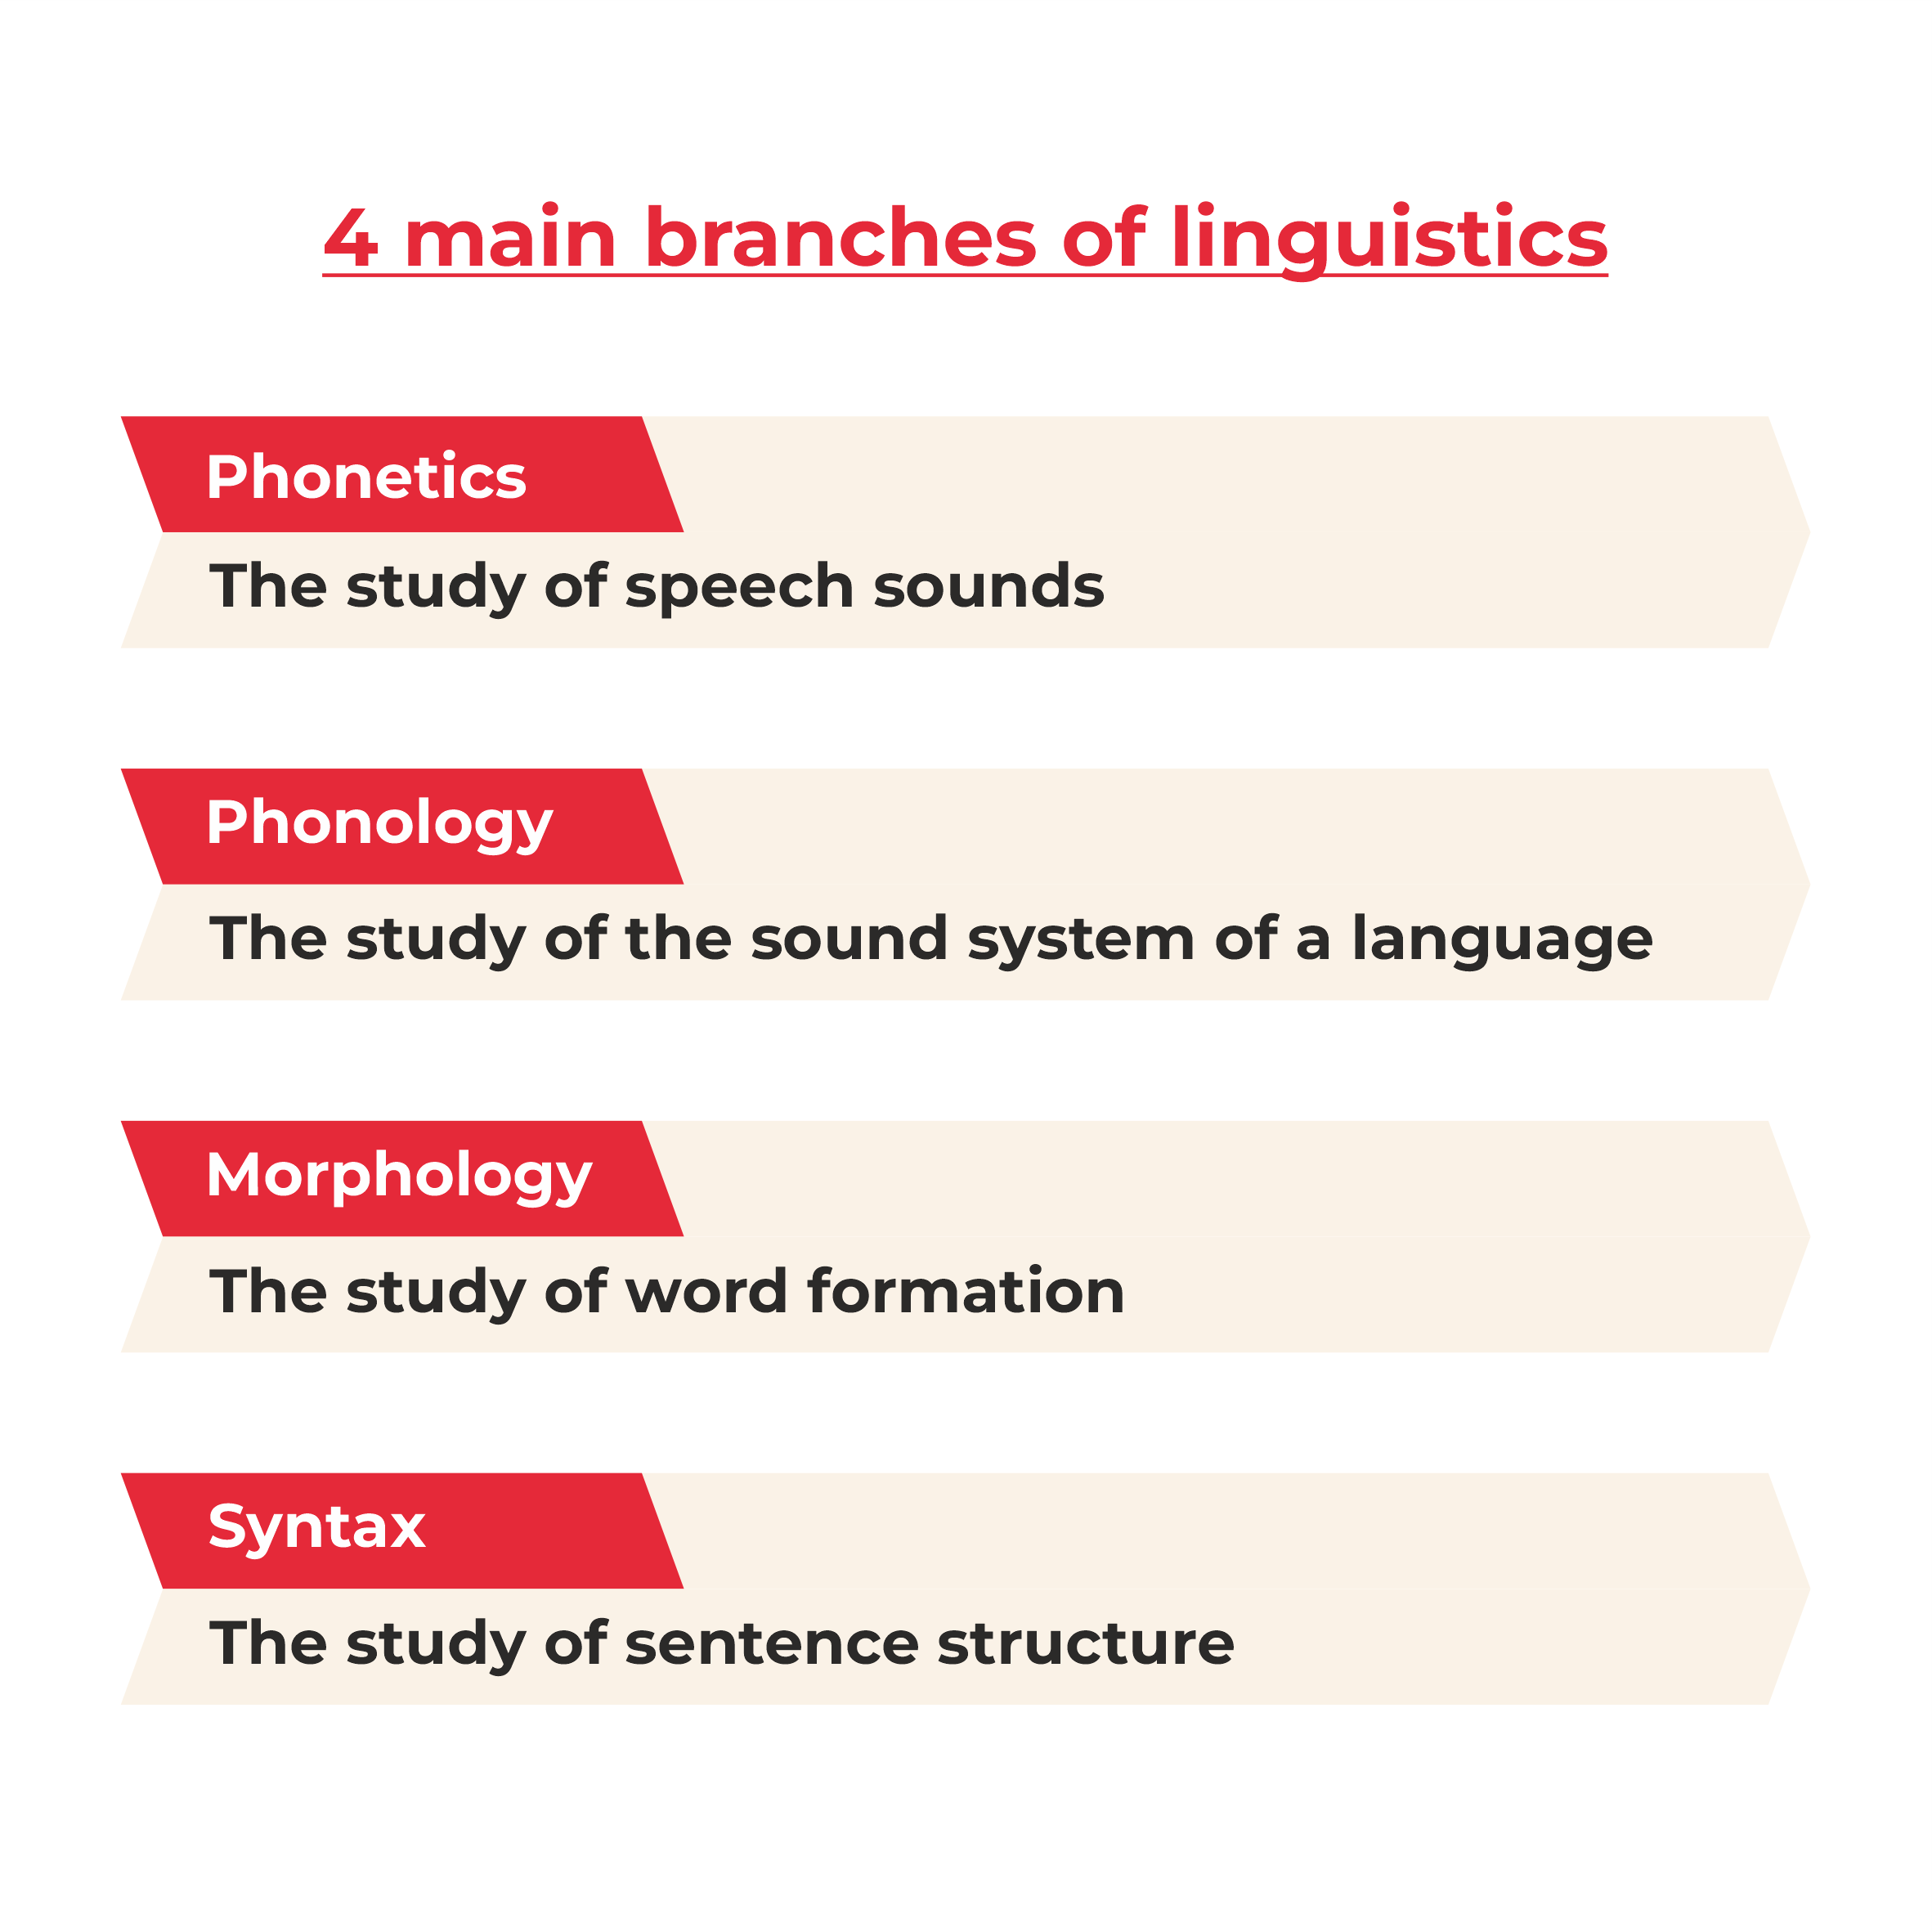 4 main branches of Linguistics